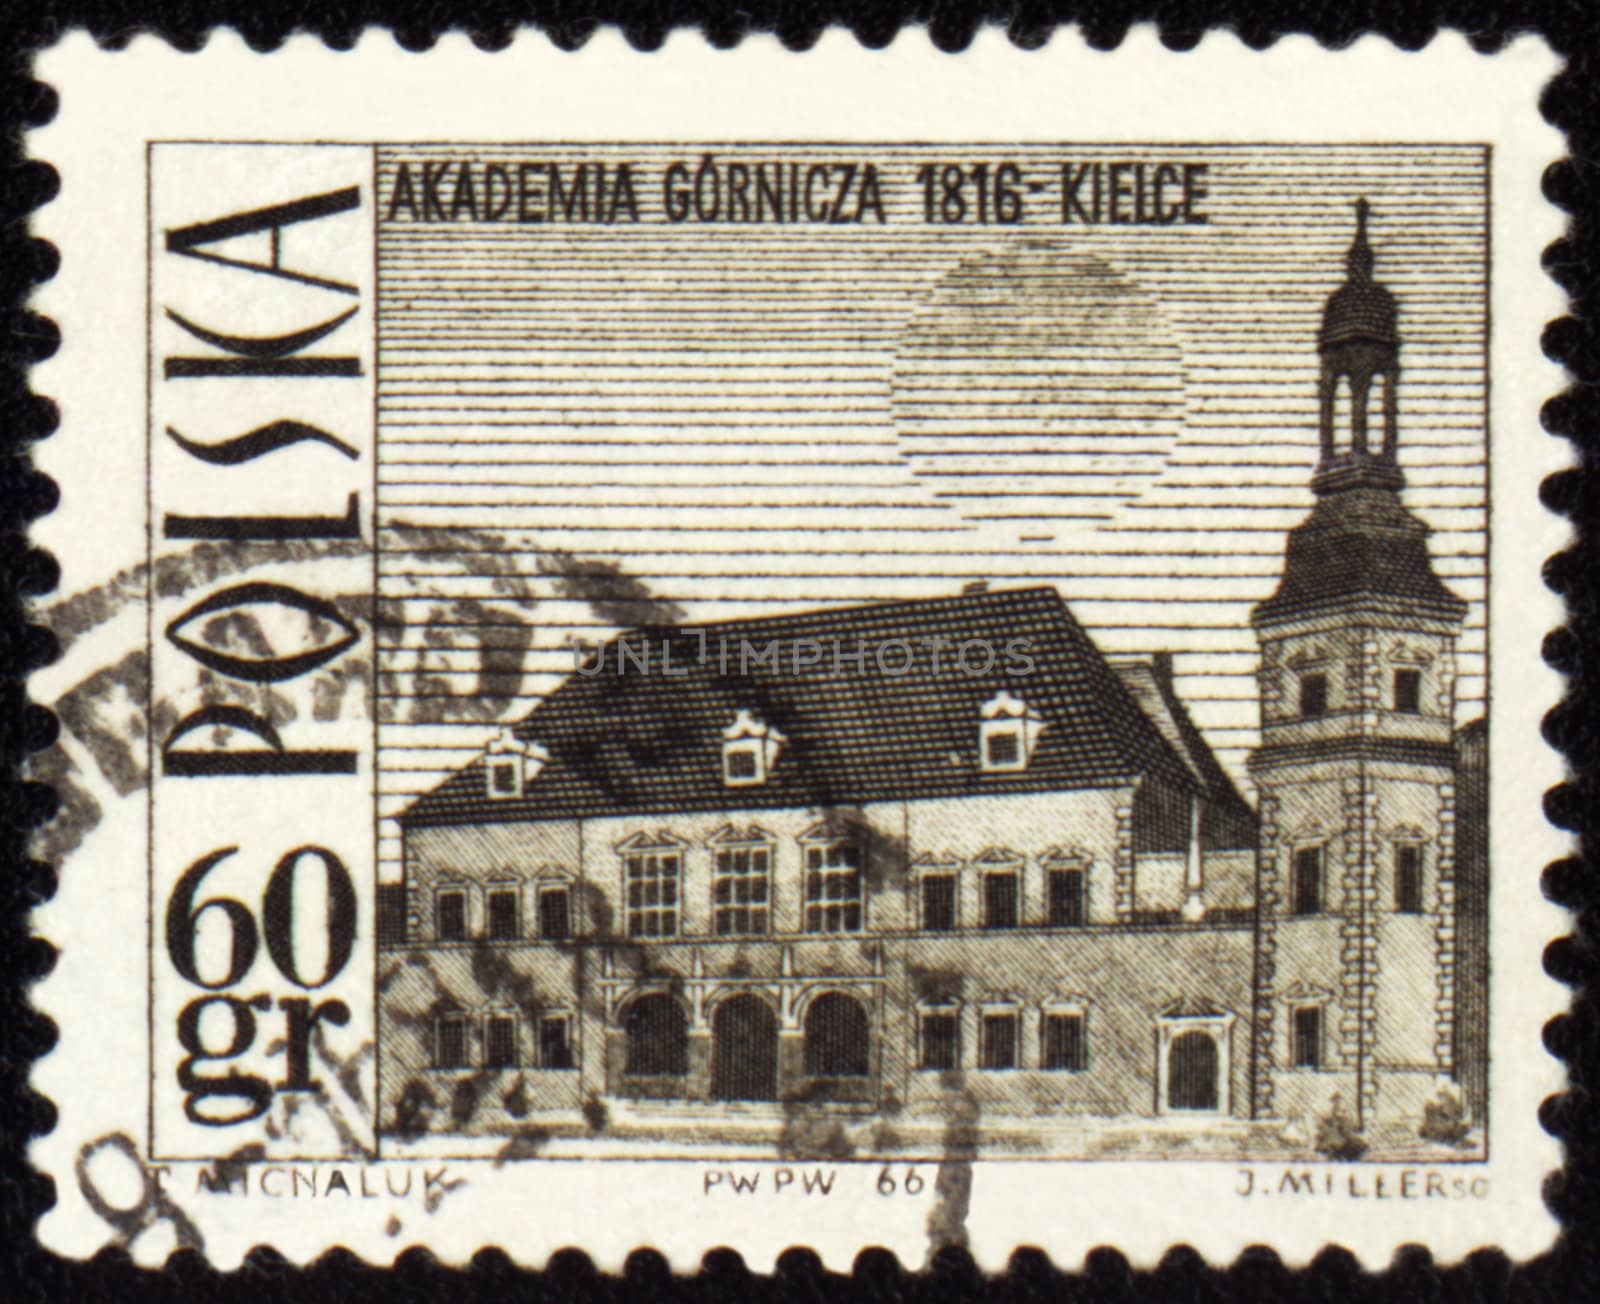 Mining Academy in Kielce on post stamp by wander